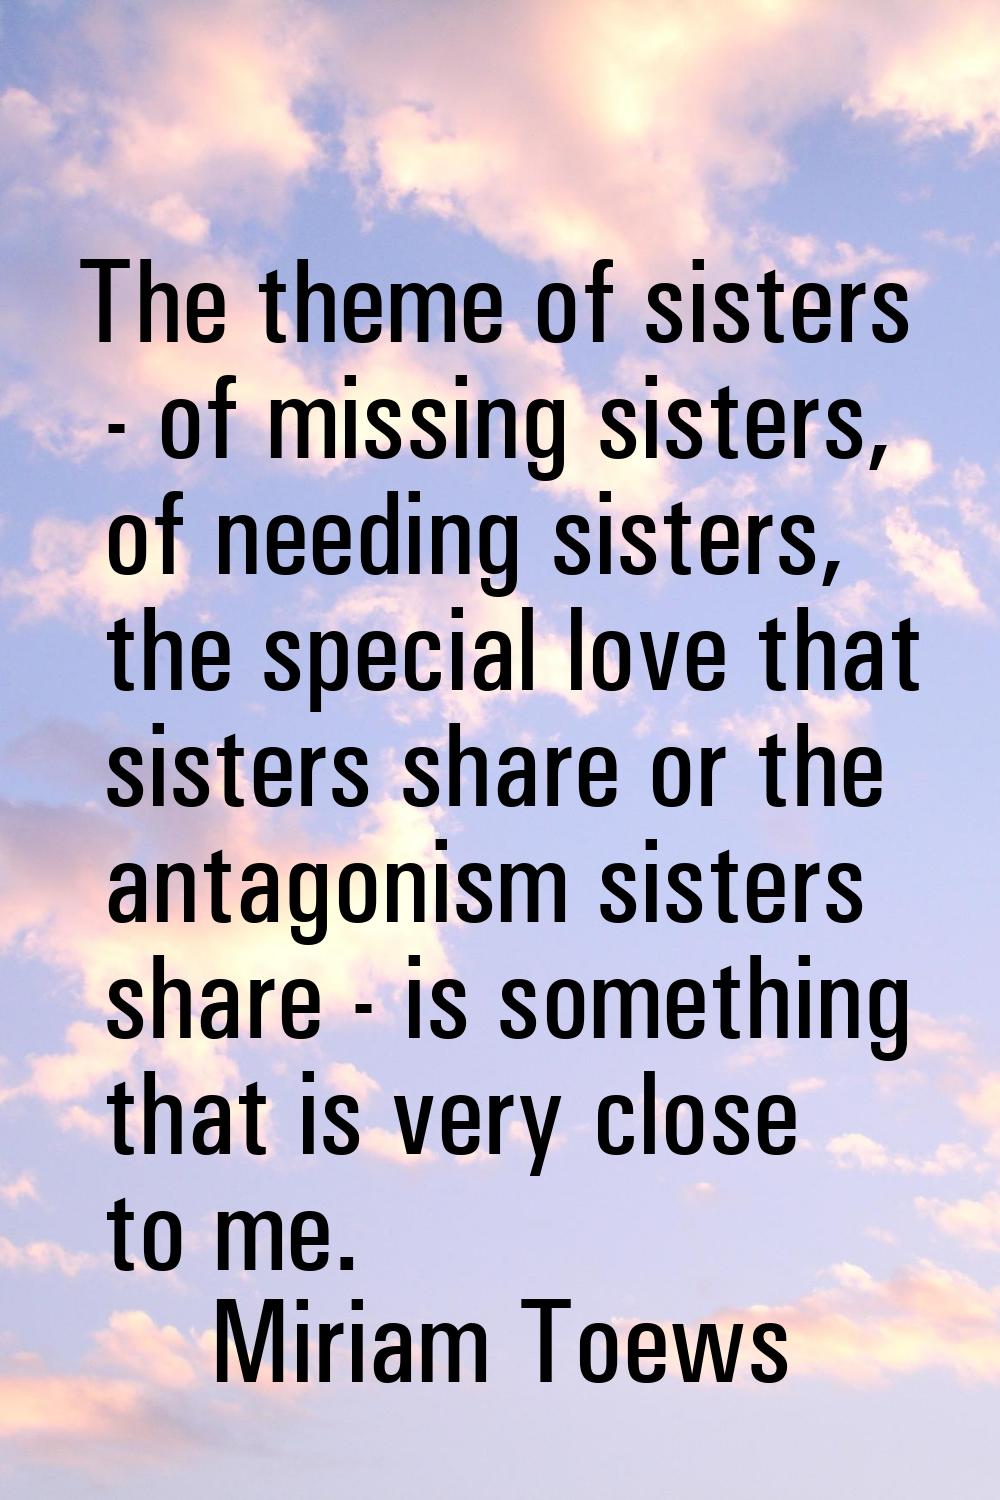 The theme of sisters - of missing sisters, of needing sisters, the special love that sisters share 